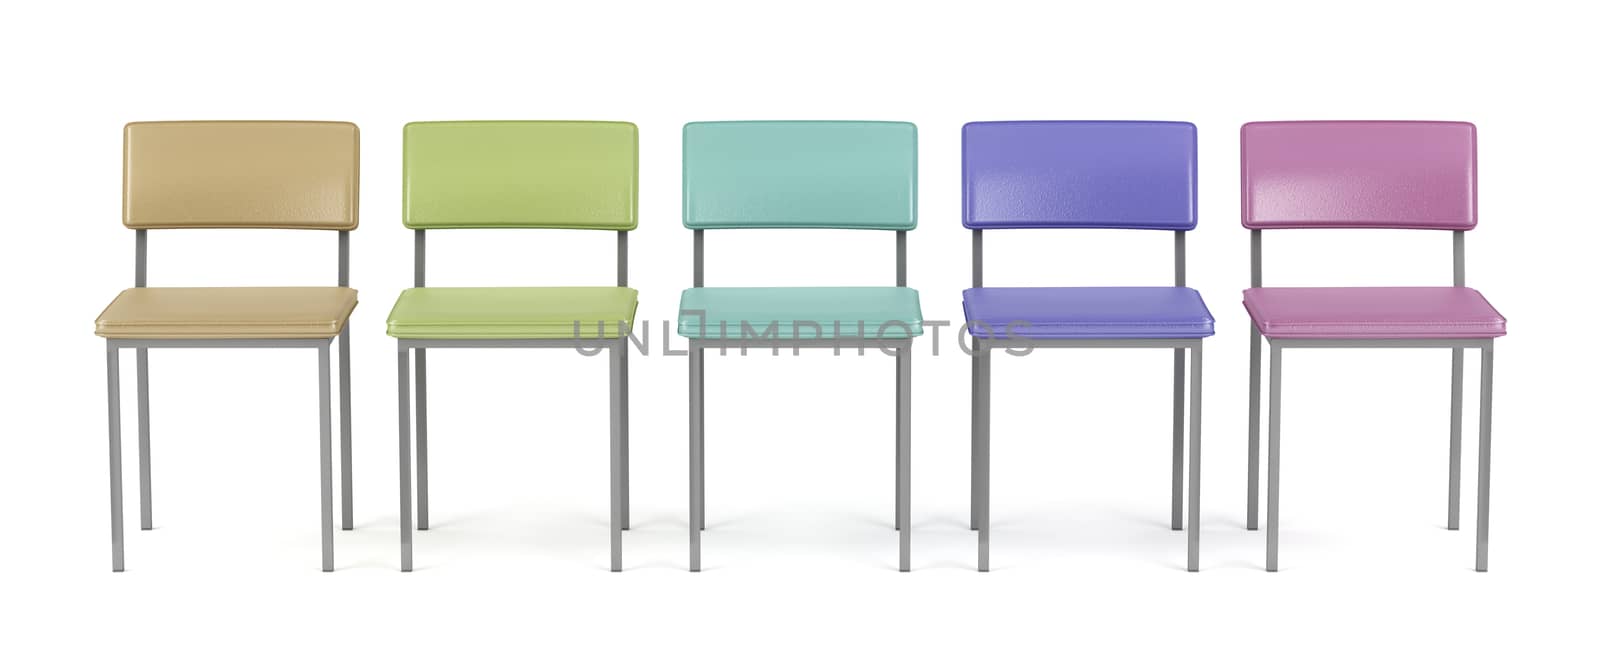 Colorful chairs on white background by magraphics